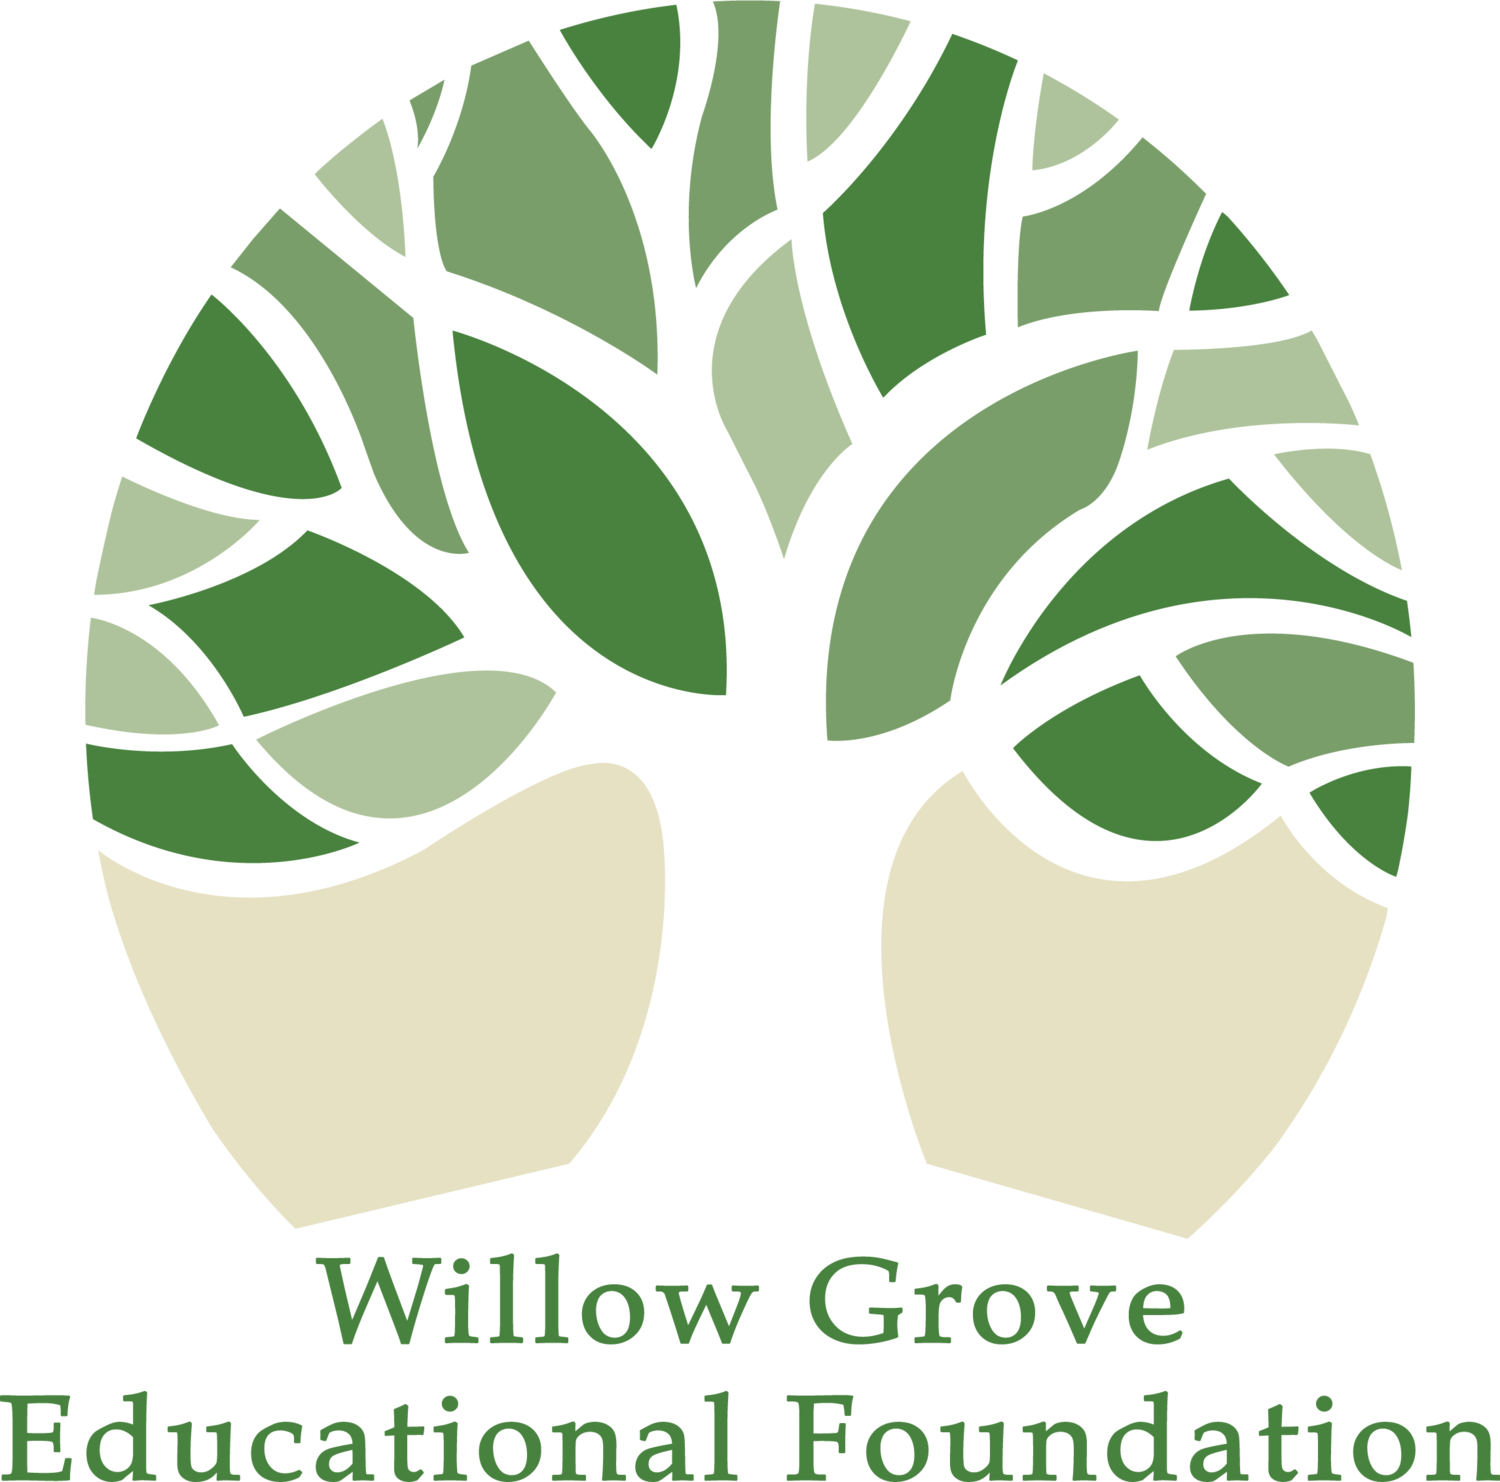 Willow Grove Educational Foundation